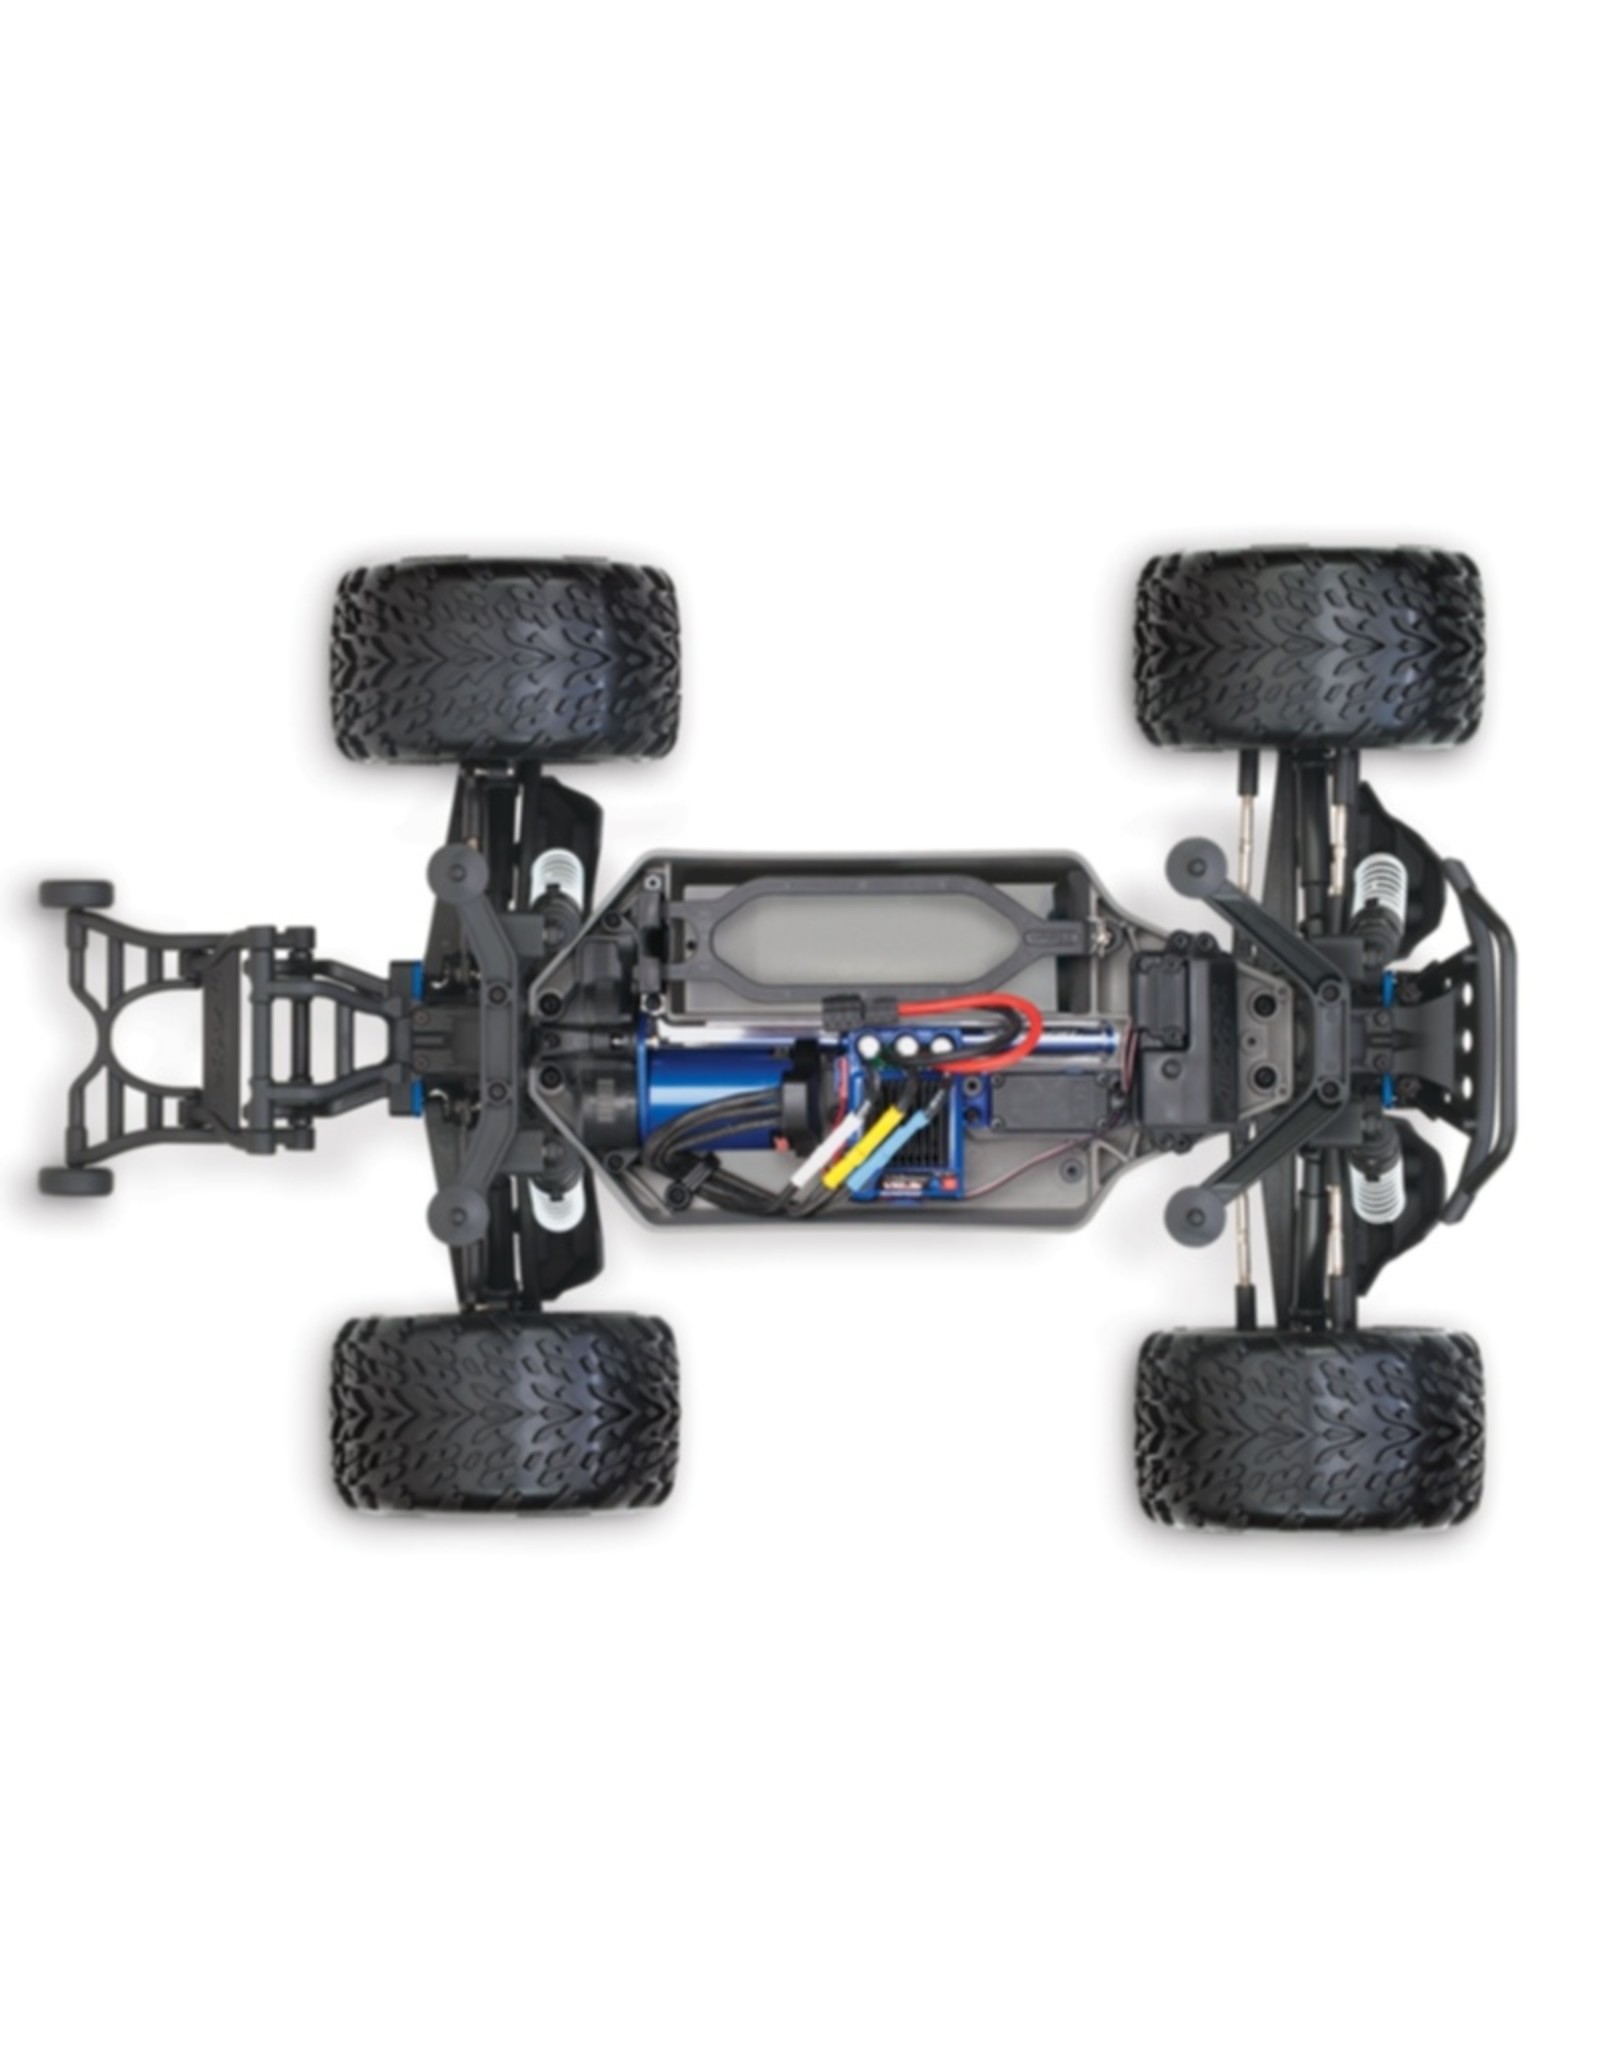 Traxxas TRA67086-4 Blue Stampede® 4X4 VXL : 1/10 Scale Monster Truck. Ready-to-Race® with TQi Traxxas Link™ Velineon® VXL-3s brushless ESC (fwd/rev), and Traxxas Stability Management (TSM)